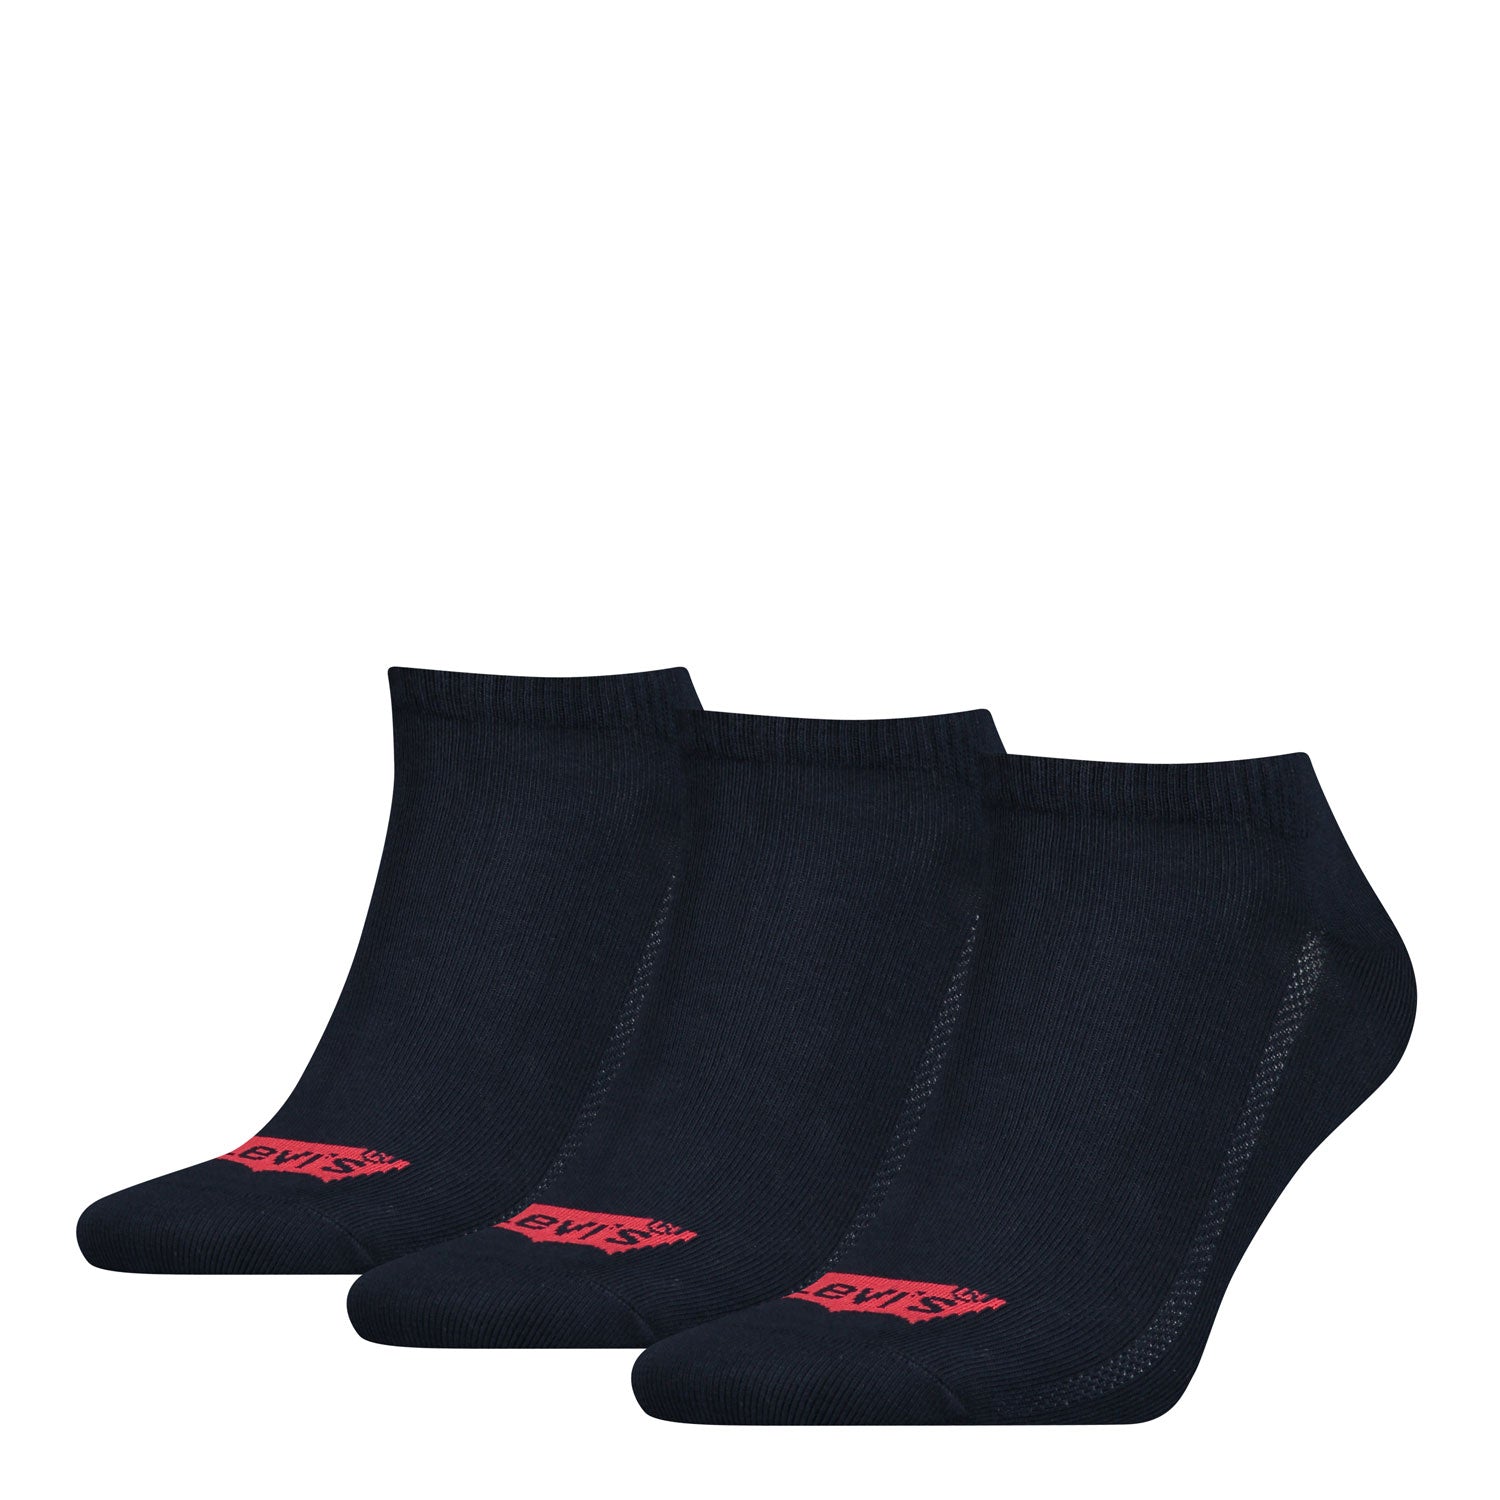 Levis Levis Low Cut Batwing Logo 3 Pack Socks - Navy 1 Shaws Department Stores